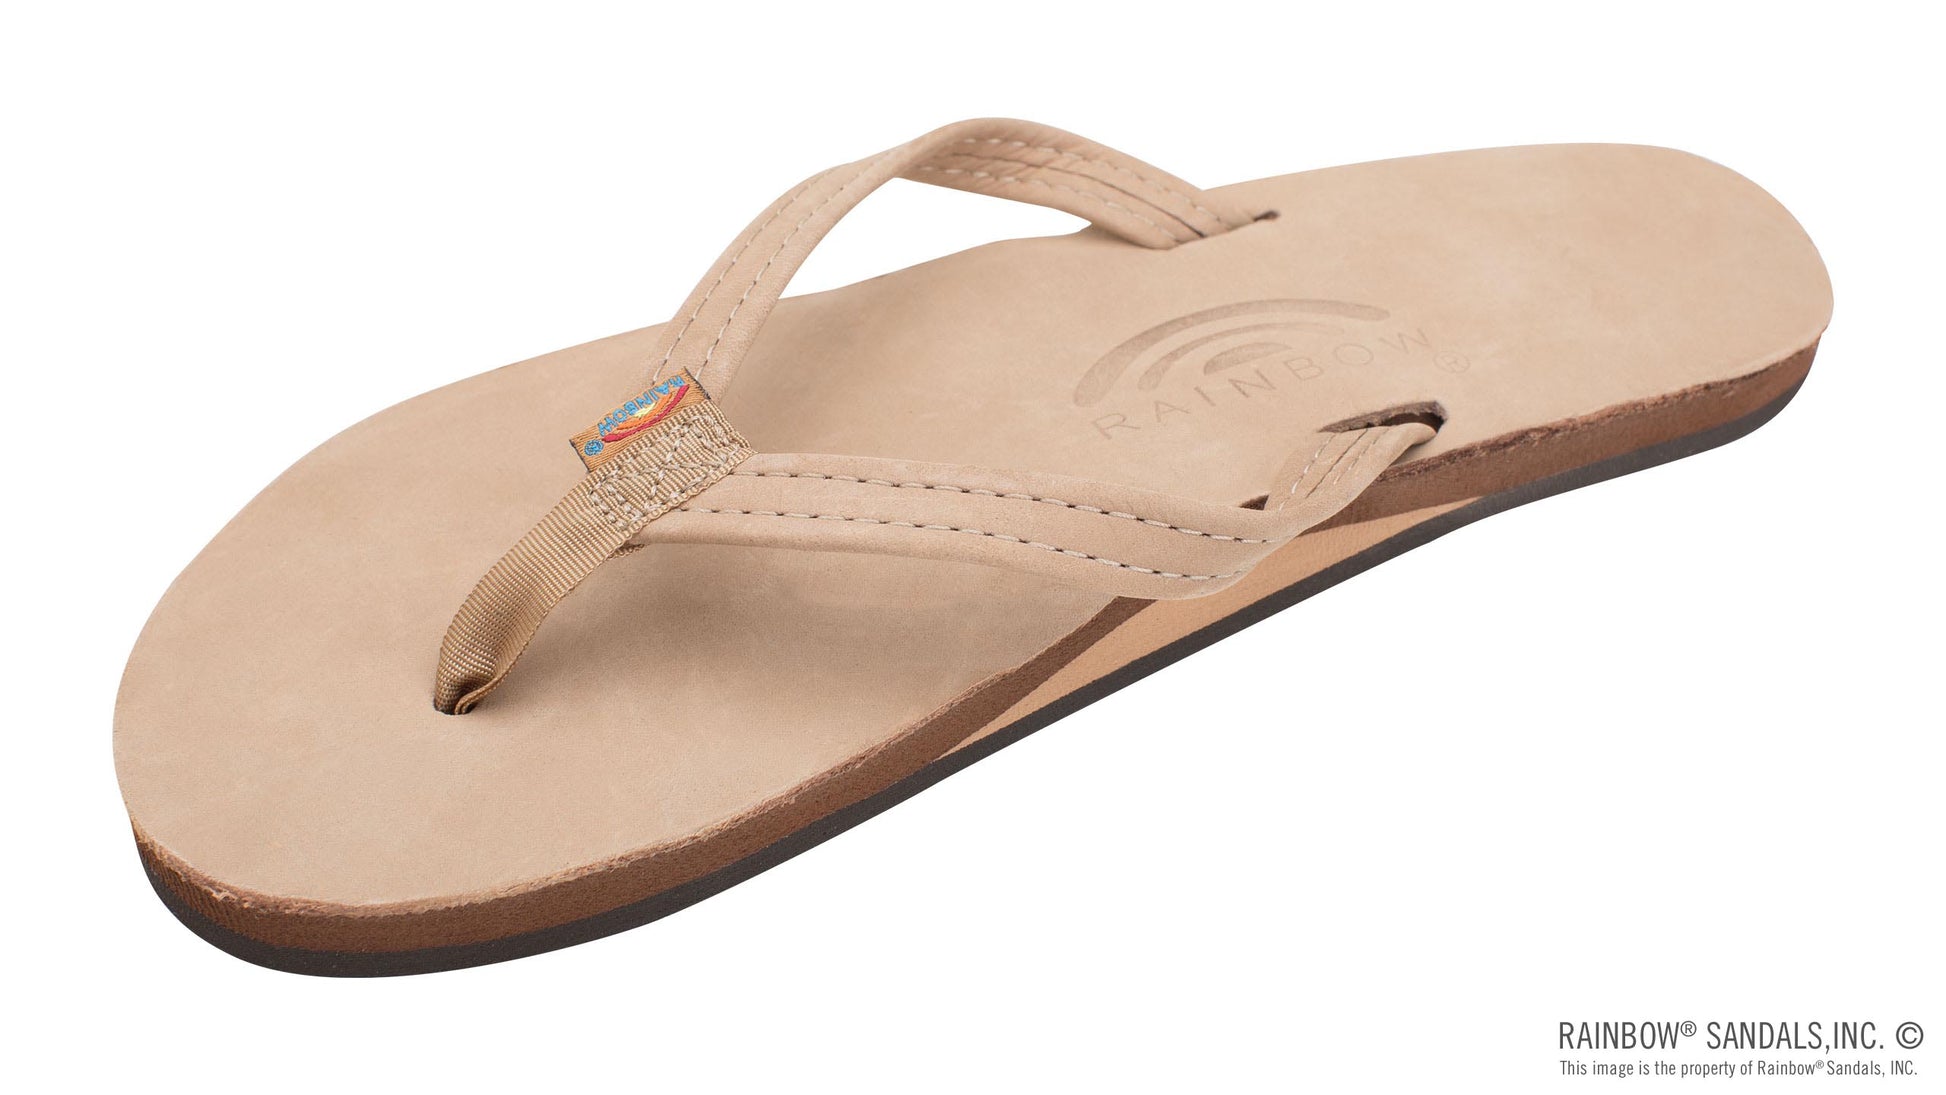 HIGH QUALITY ITALIAN PALM SLIPPERS SUITABLE FOR ALMOST EVERY